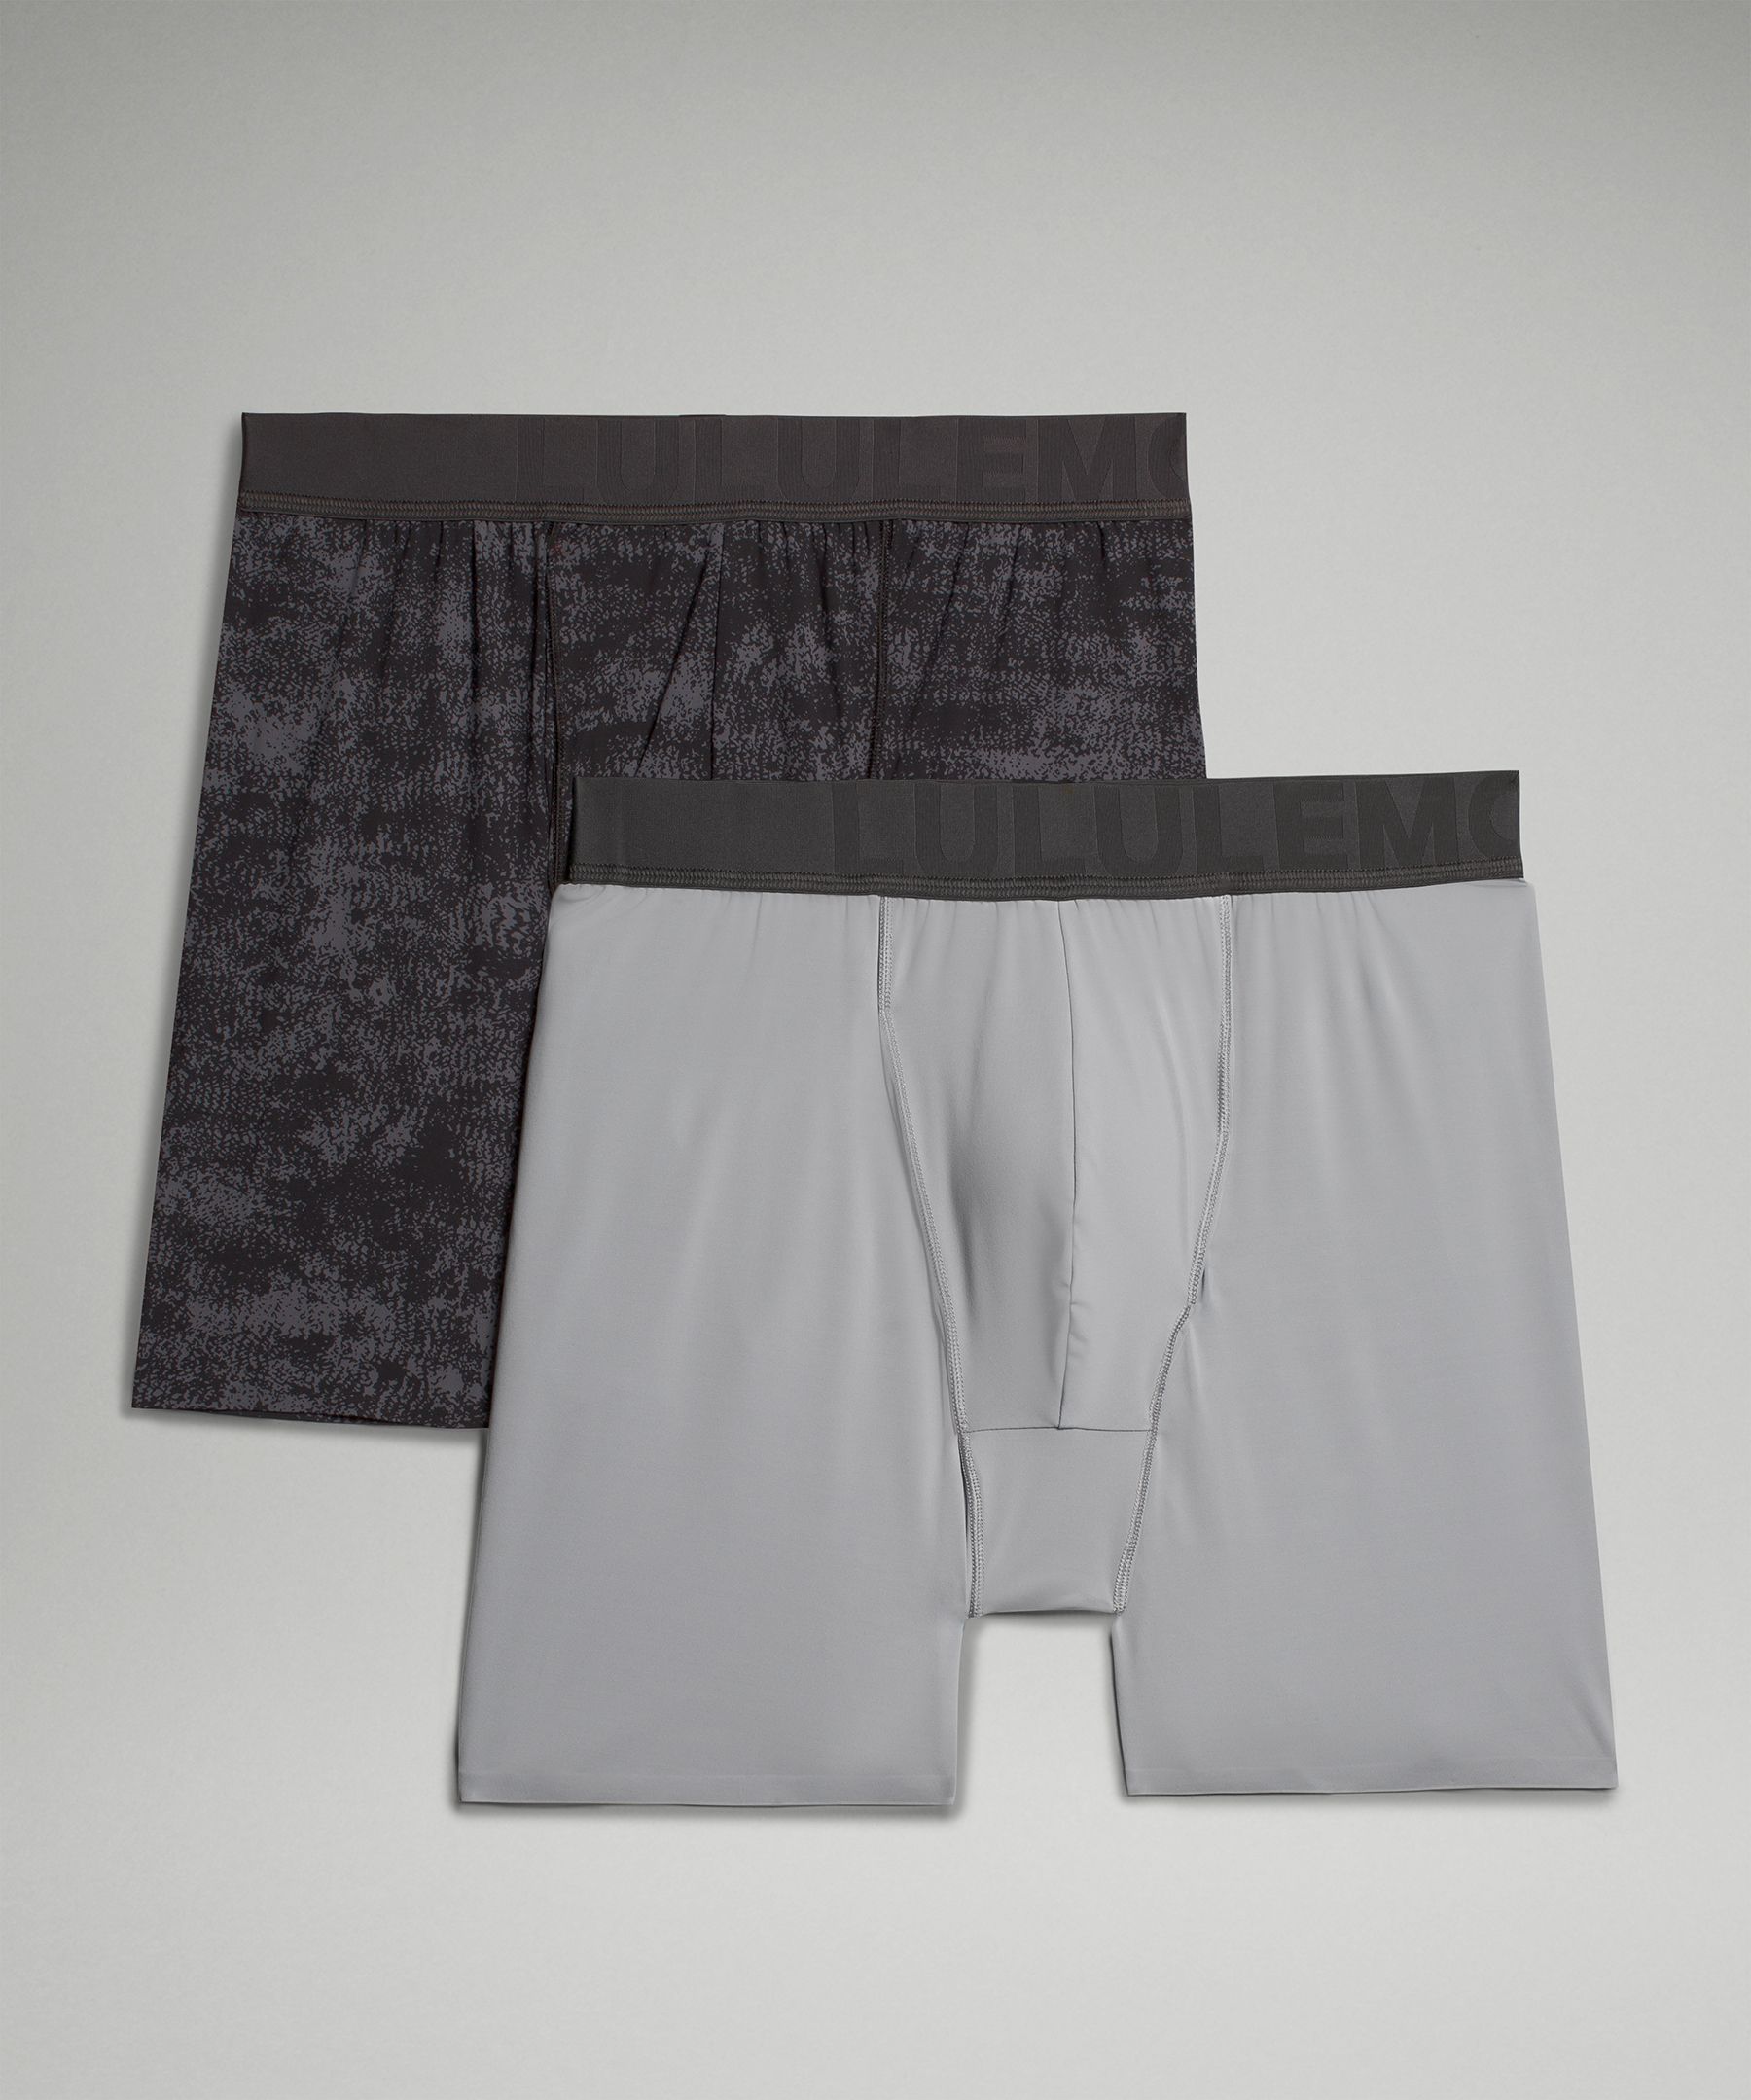 Lululemon Built To Move Boxers 5" 2 Pack